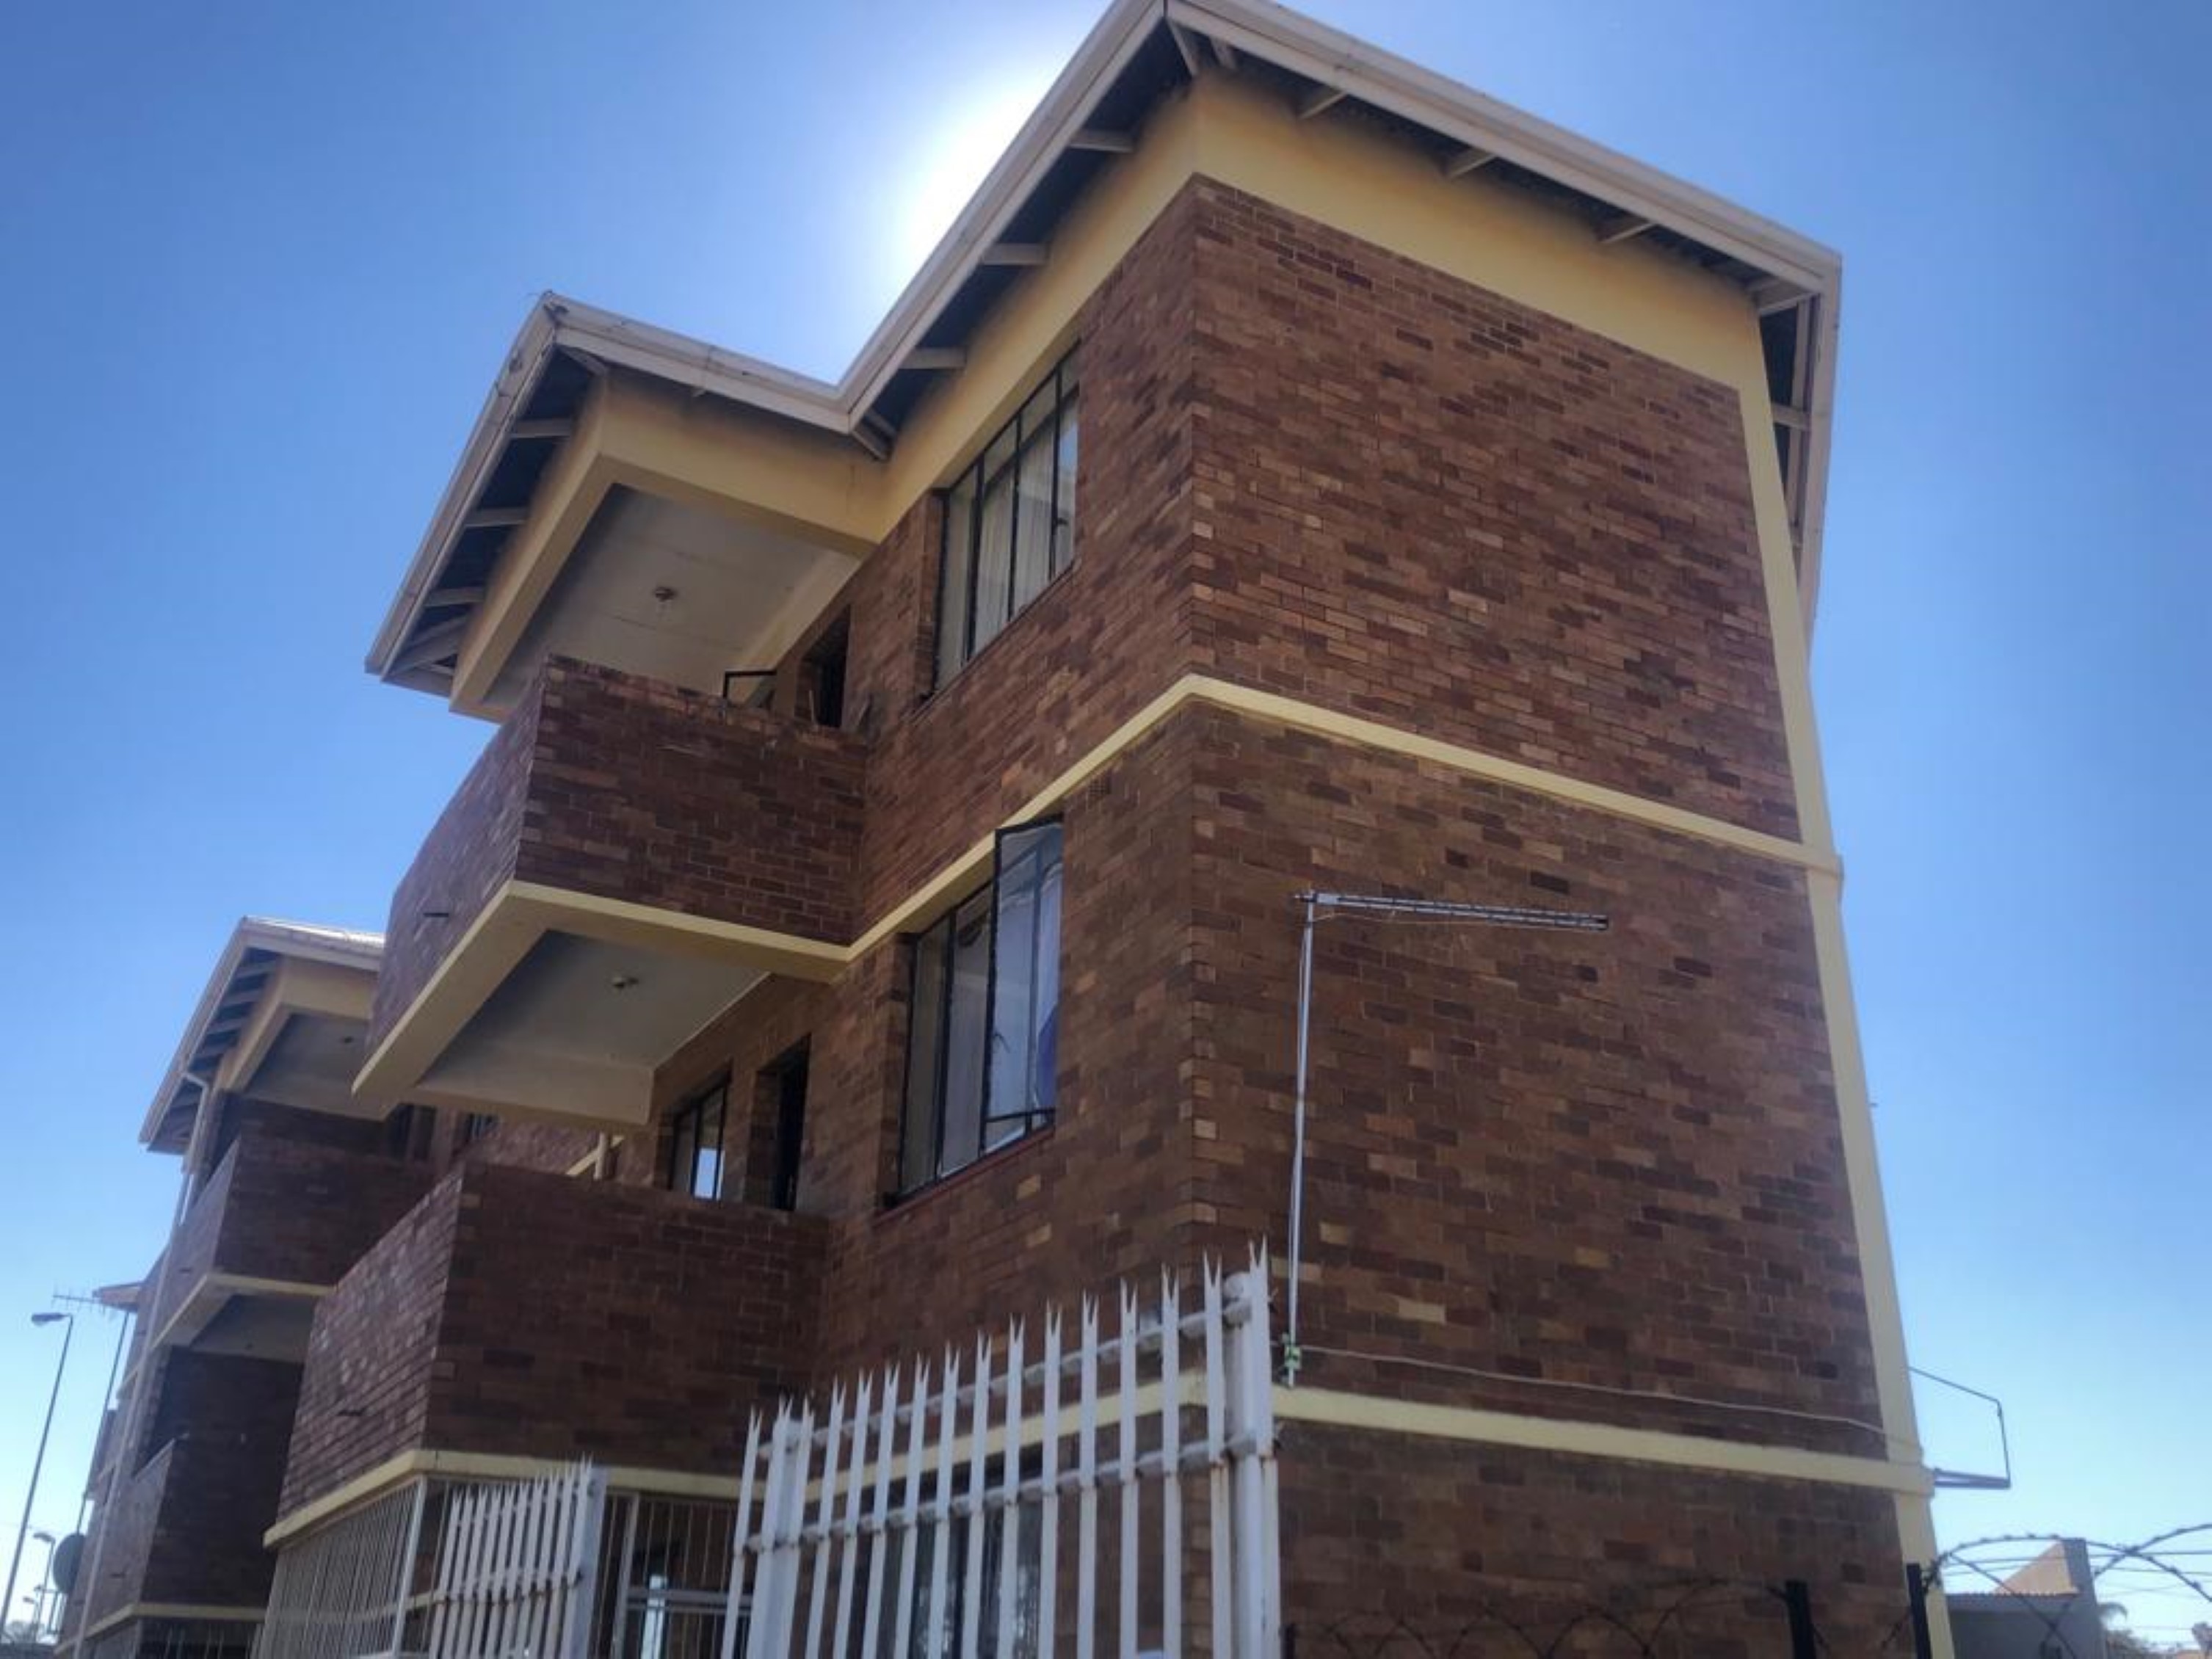 1 Bedroomed Flat in Theo's Court (pty)ltd